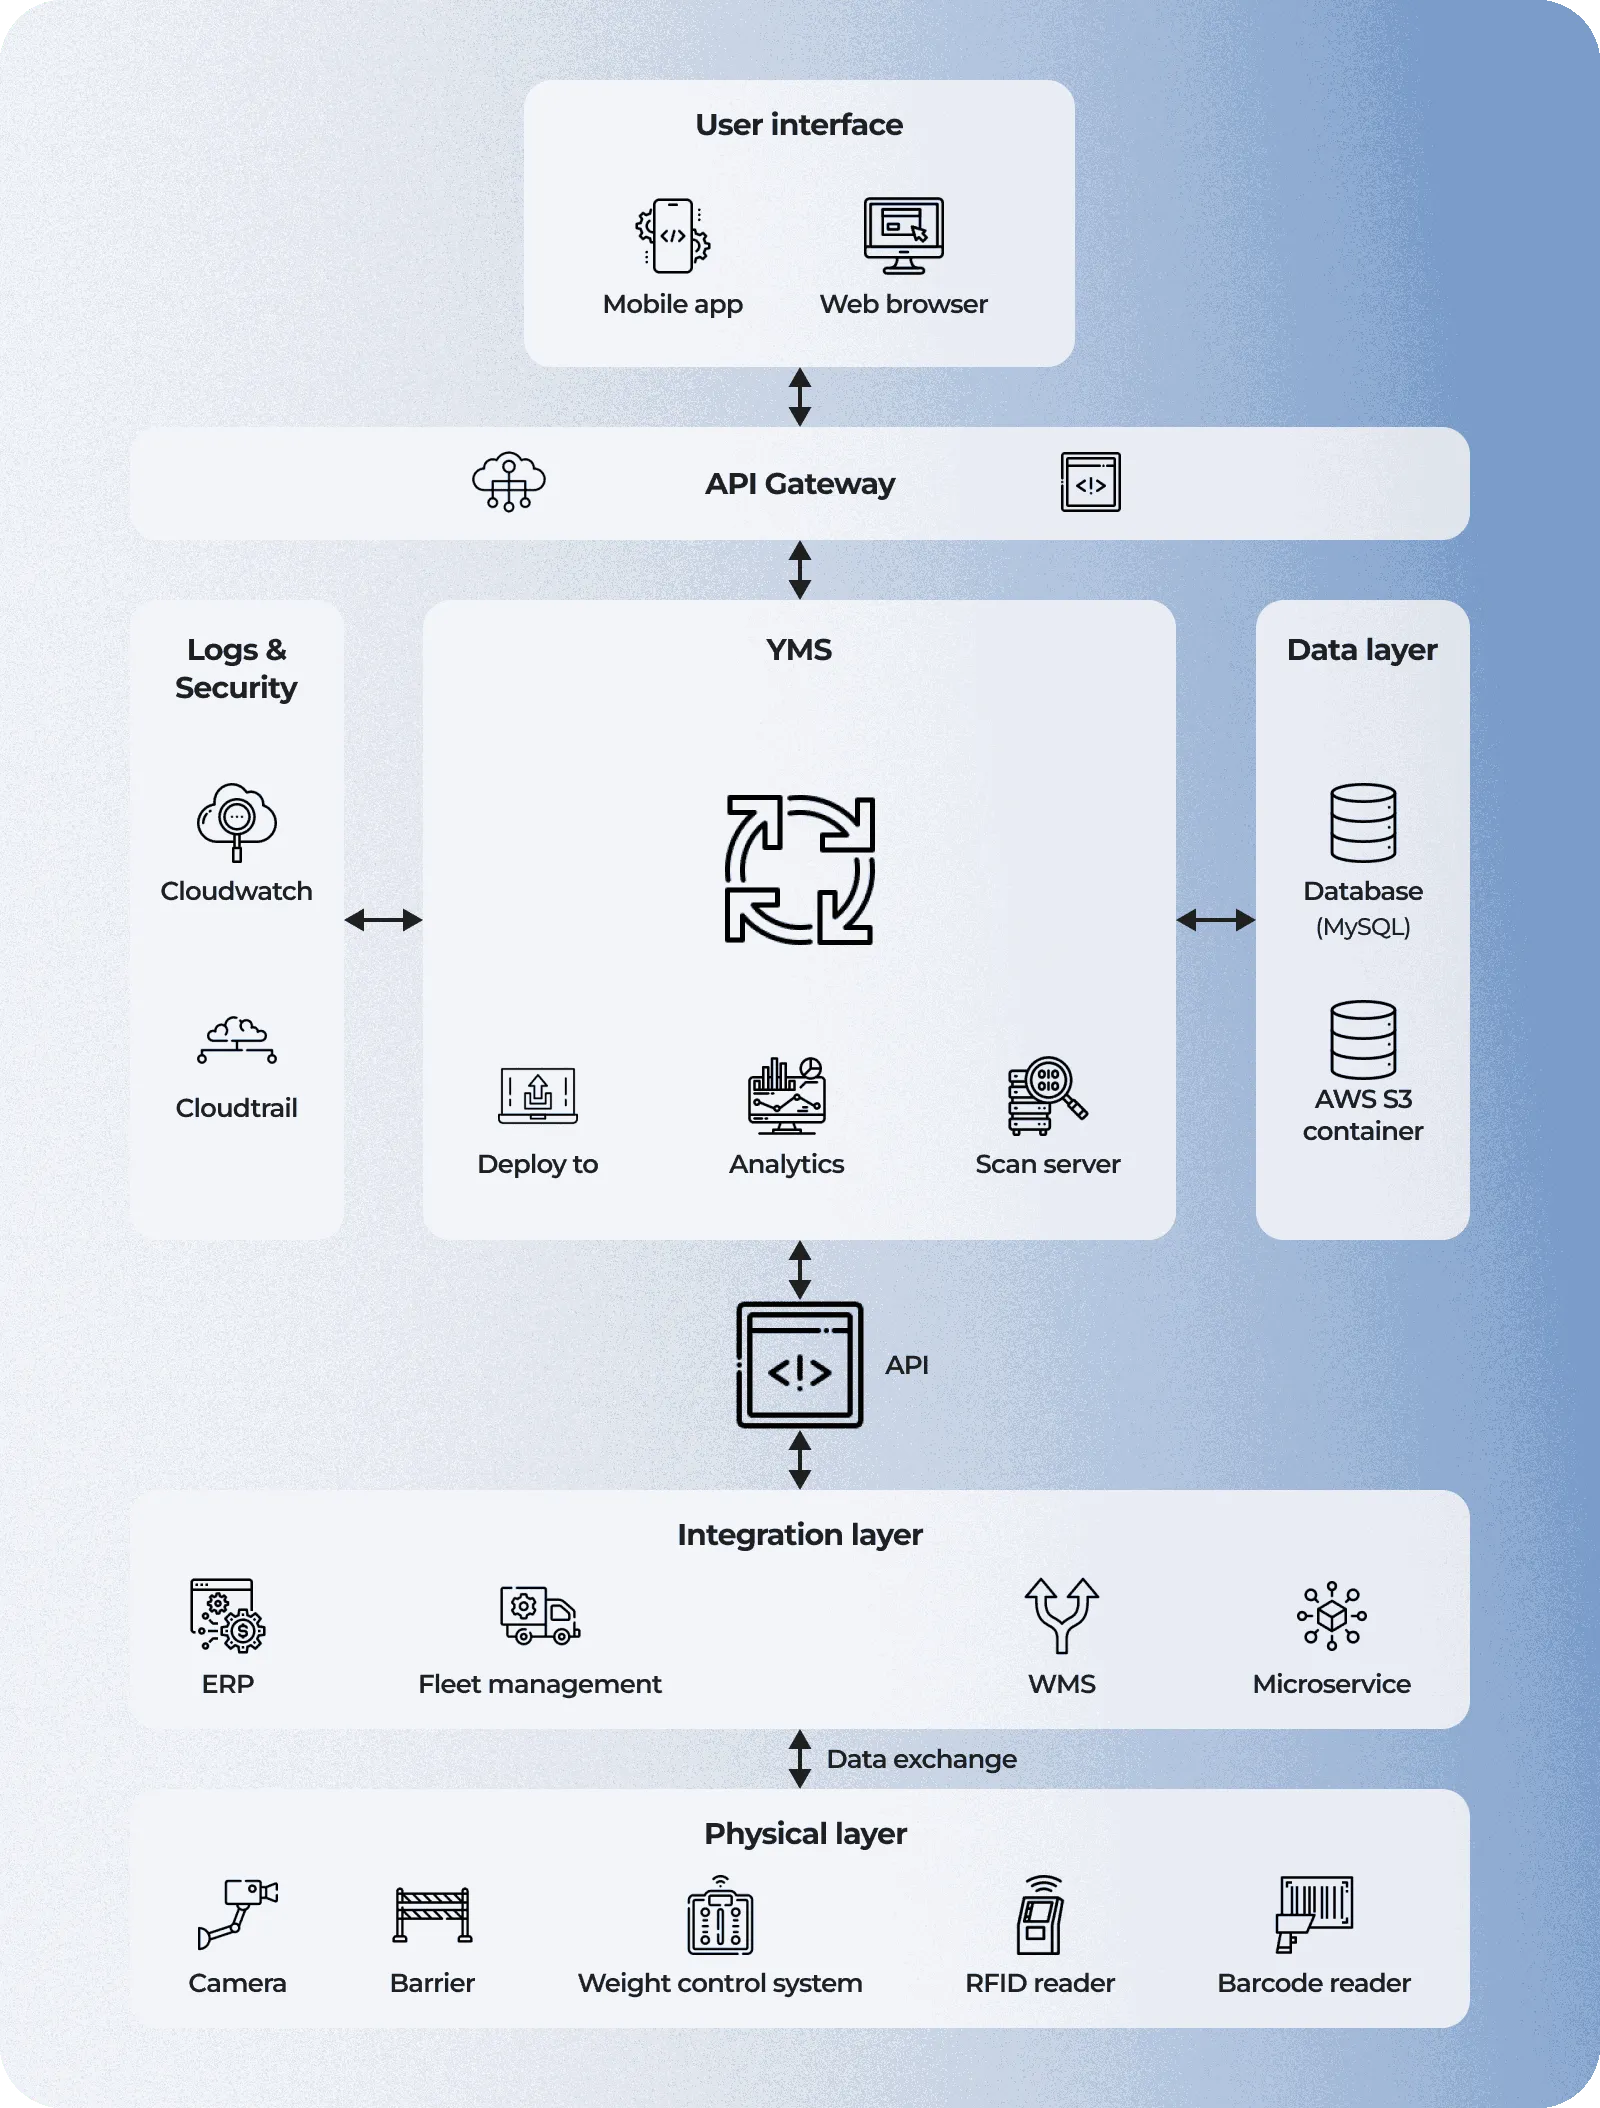 Yard management system's solution architecture made by Cleveroad